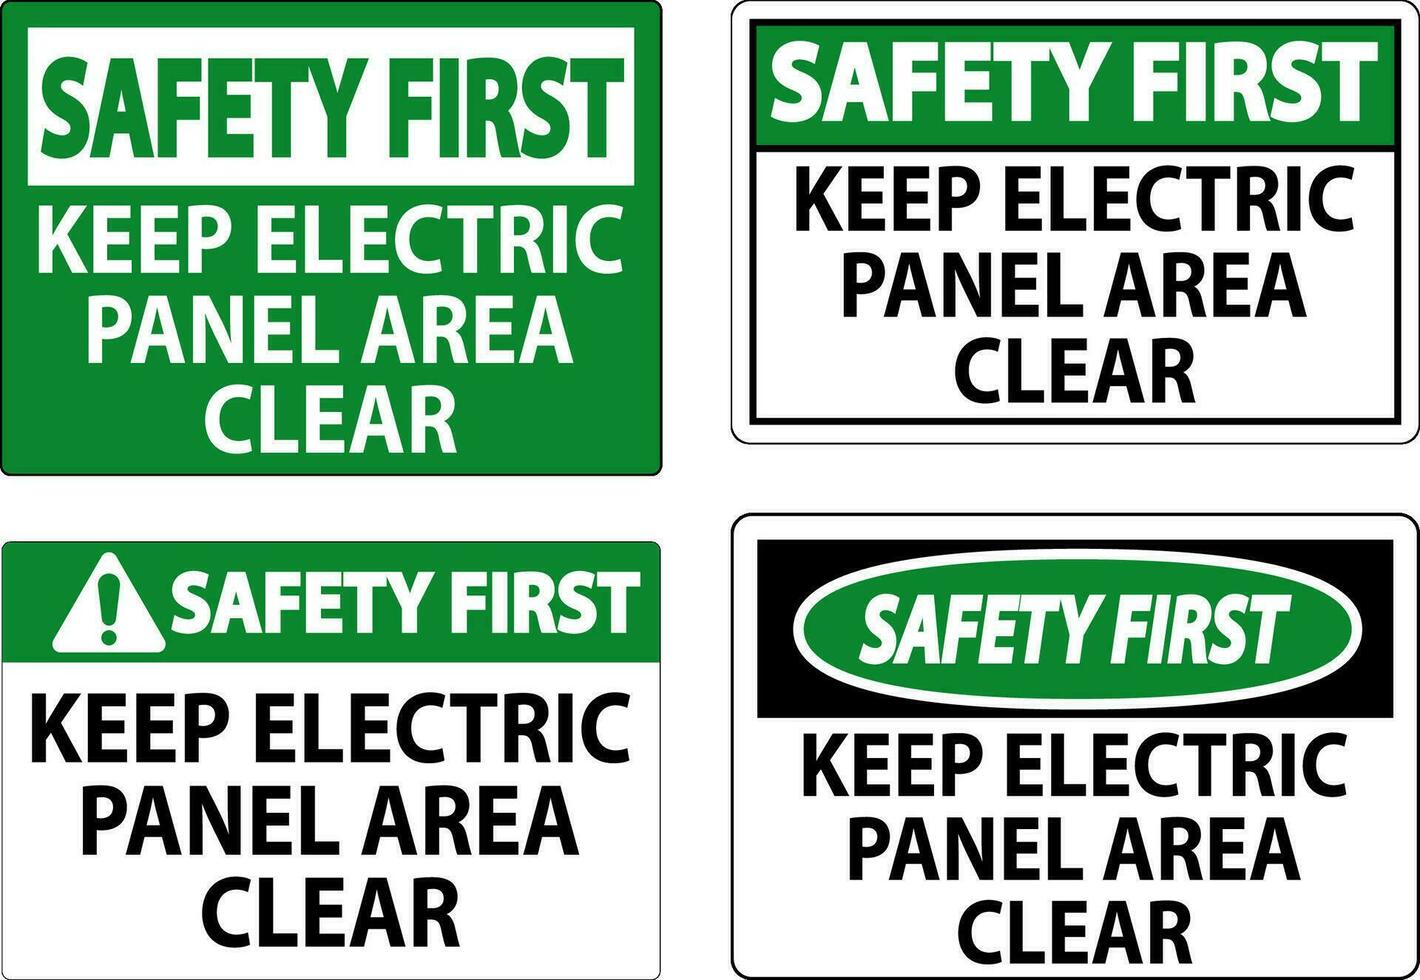 Safety First Sign Keep Electric Panel Area Clear vector